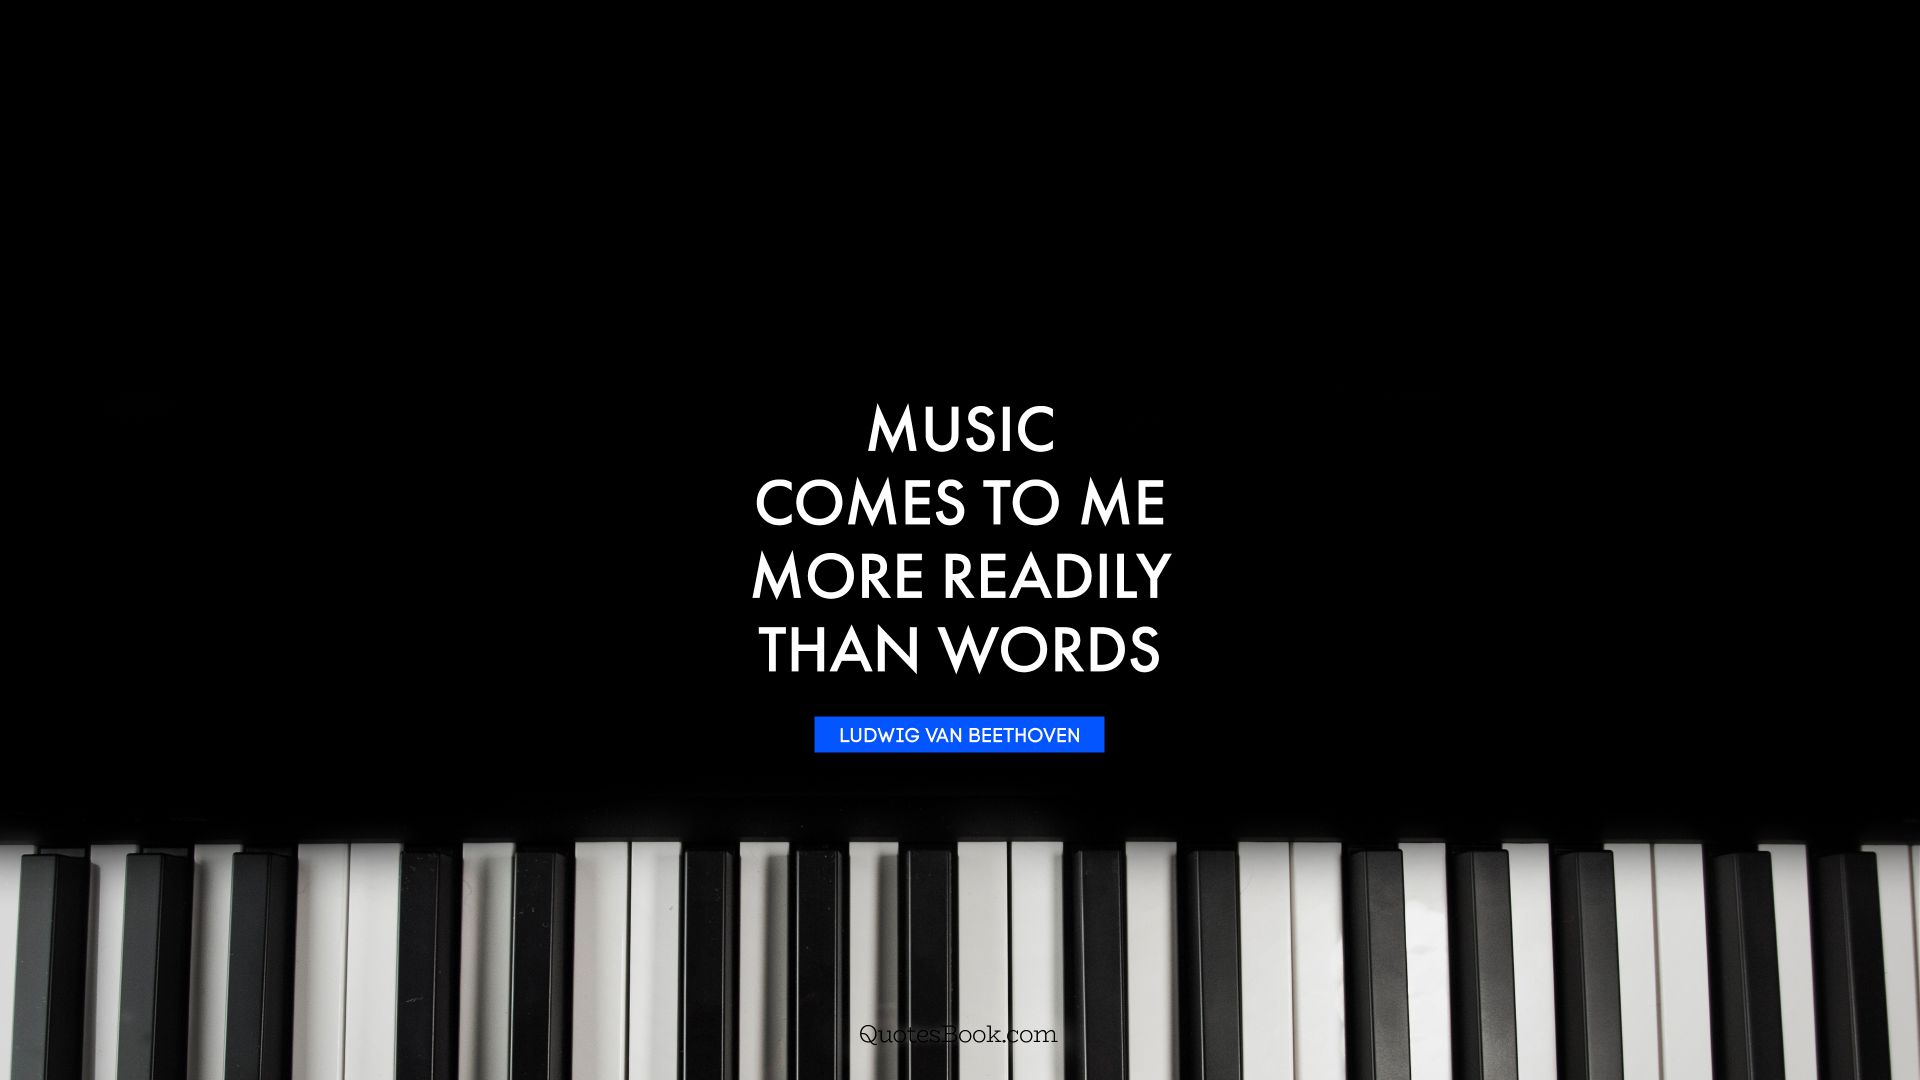 Music comes to me more readily than words. - Quote by Ludwig van Beethoven